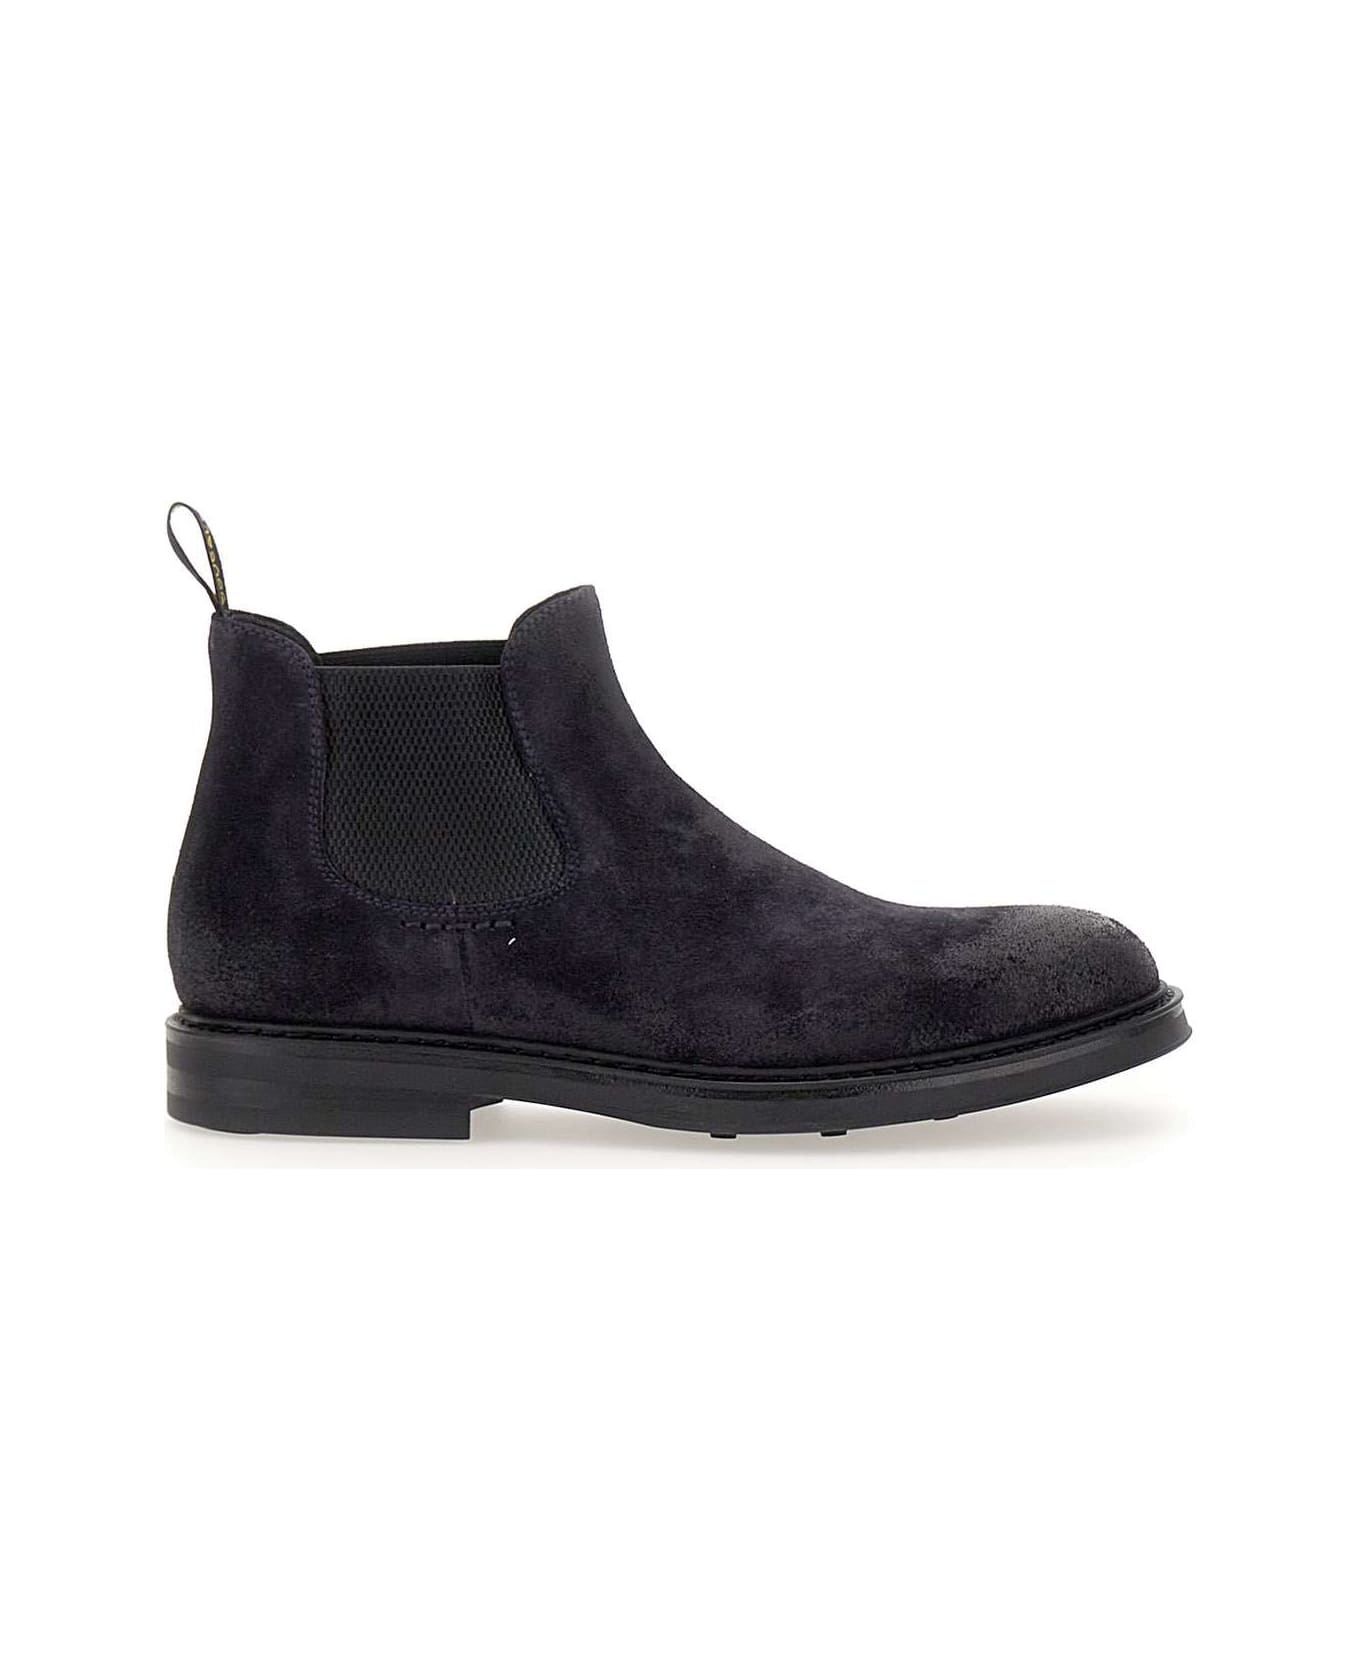 Doucal's "oil" Ankle Boot In Suede - BLUE ブーツ